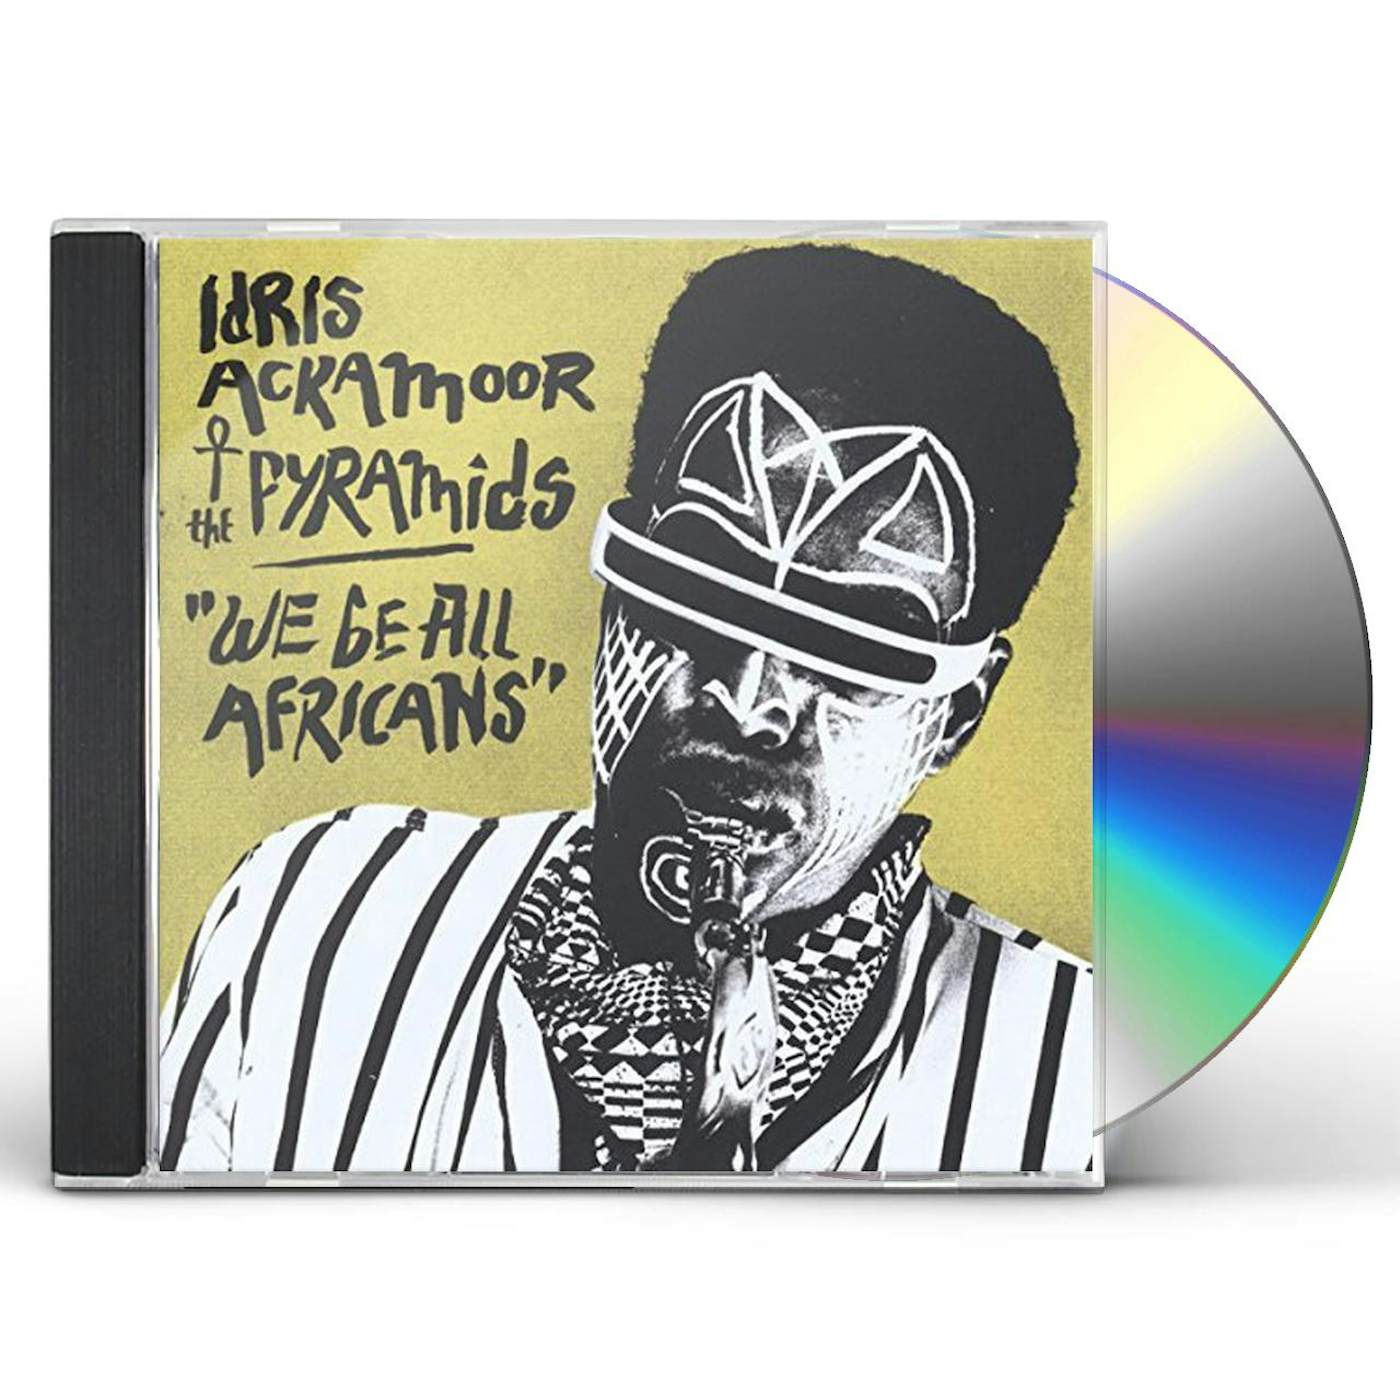 Idris Ackamoor & The Pyramids WE BE ALL AFRICANS CD